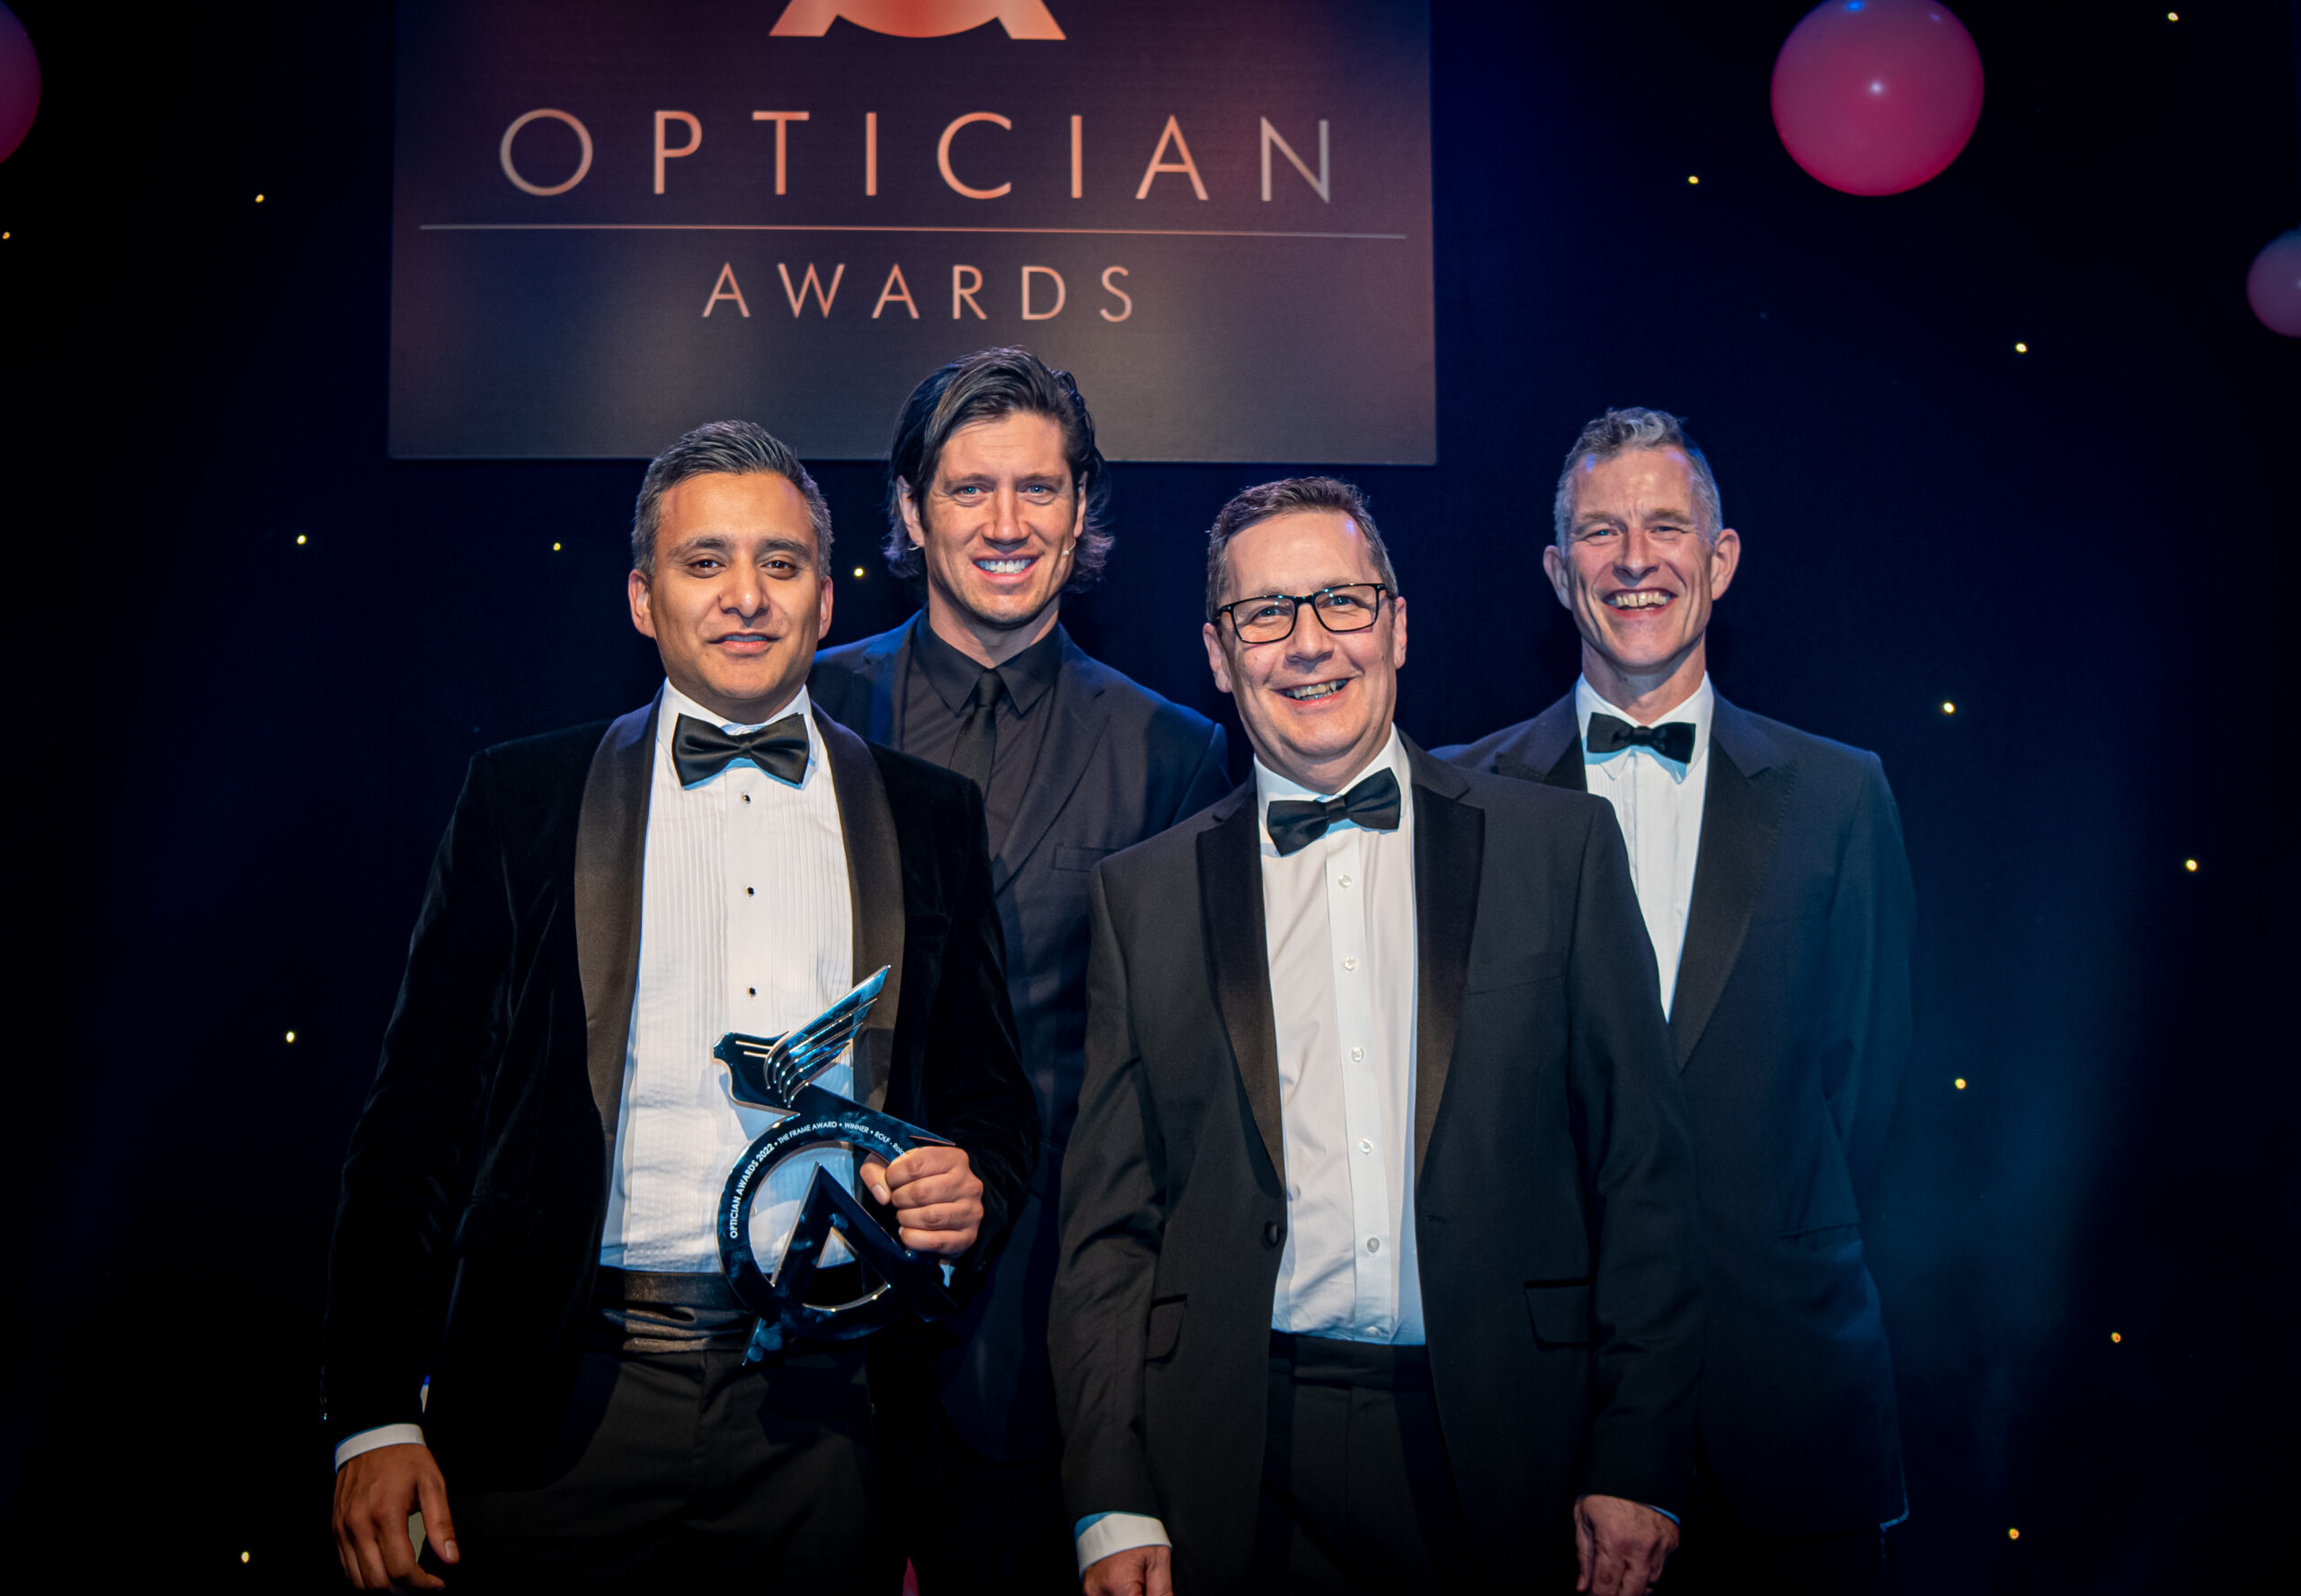 Harvey Dhadwar (image left) CEO at UK Eyewear and Distributor for rolf in the UK on stage receiving the optician awards throphy